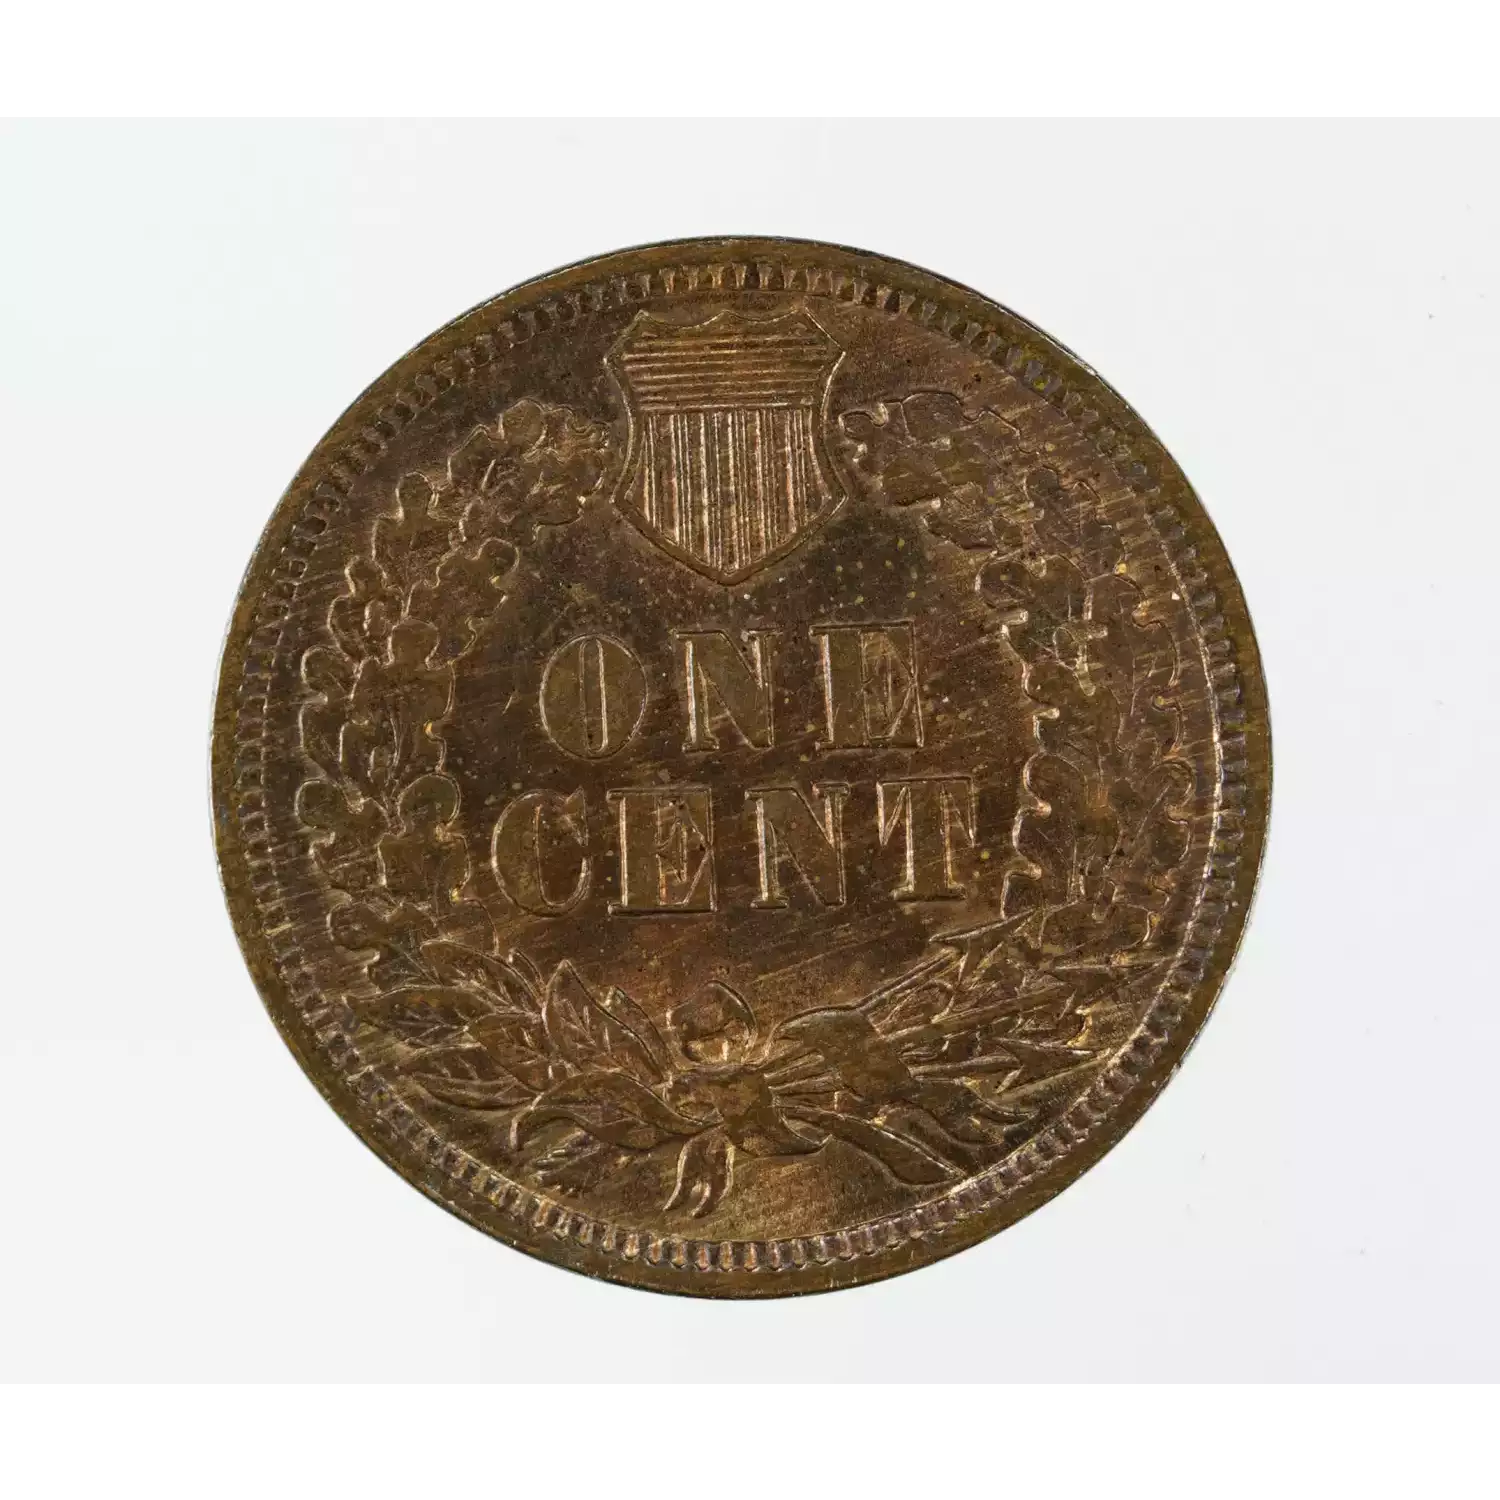 Small Cents-Indian Head 1859-1909 -Copper